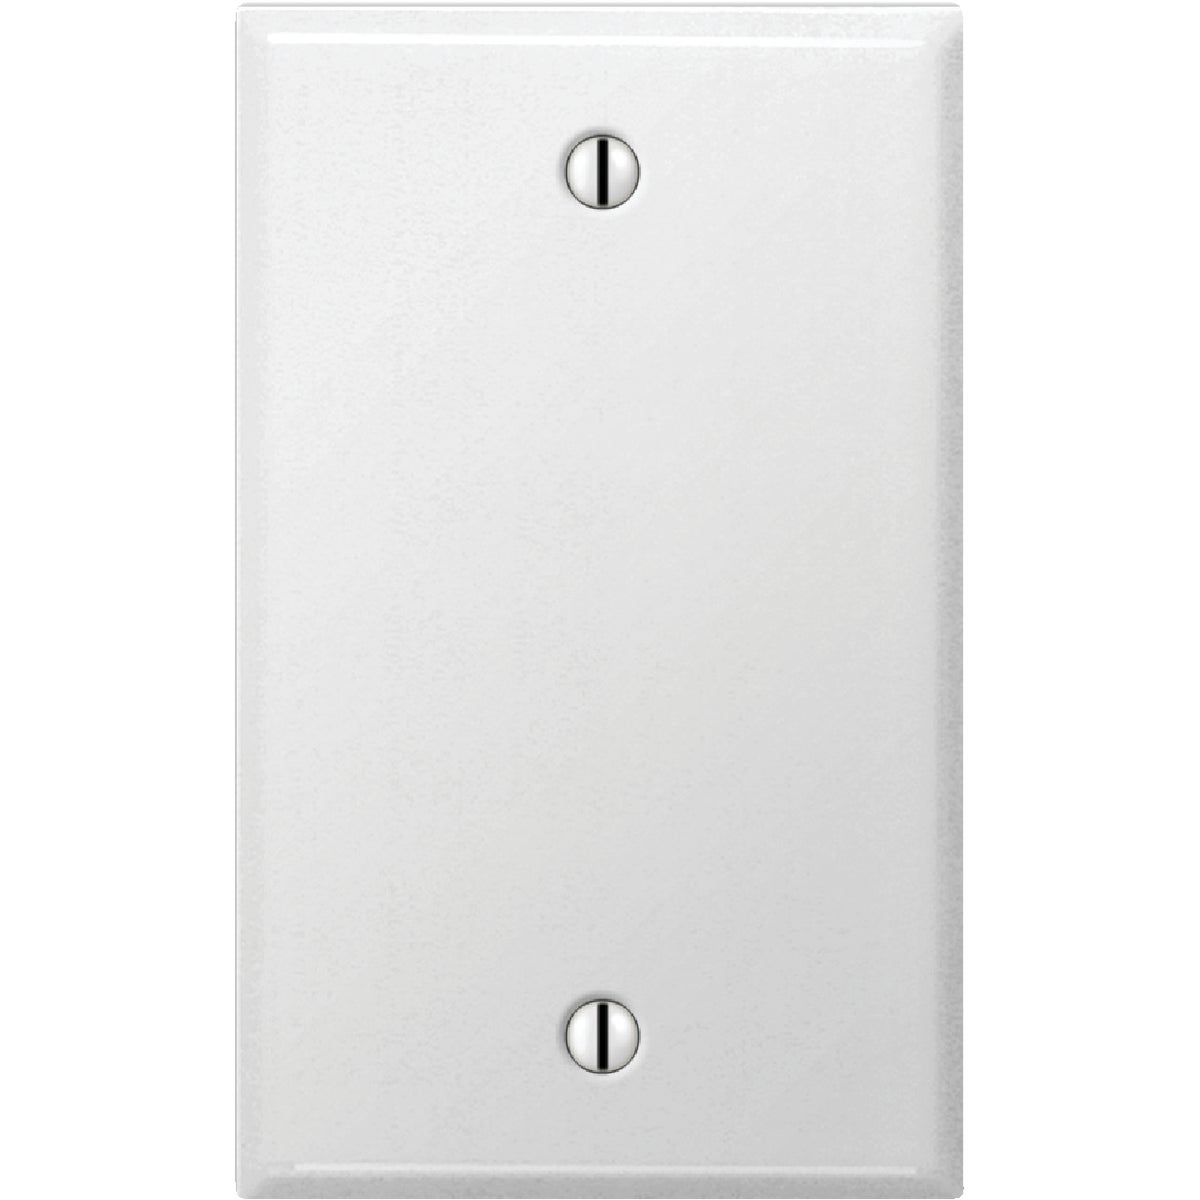 Amerelle C981BW Amerelle 1-Gang Standard Stamped Steel Blank Wall Plate, Smooth White C981BW